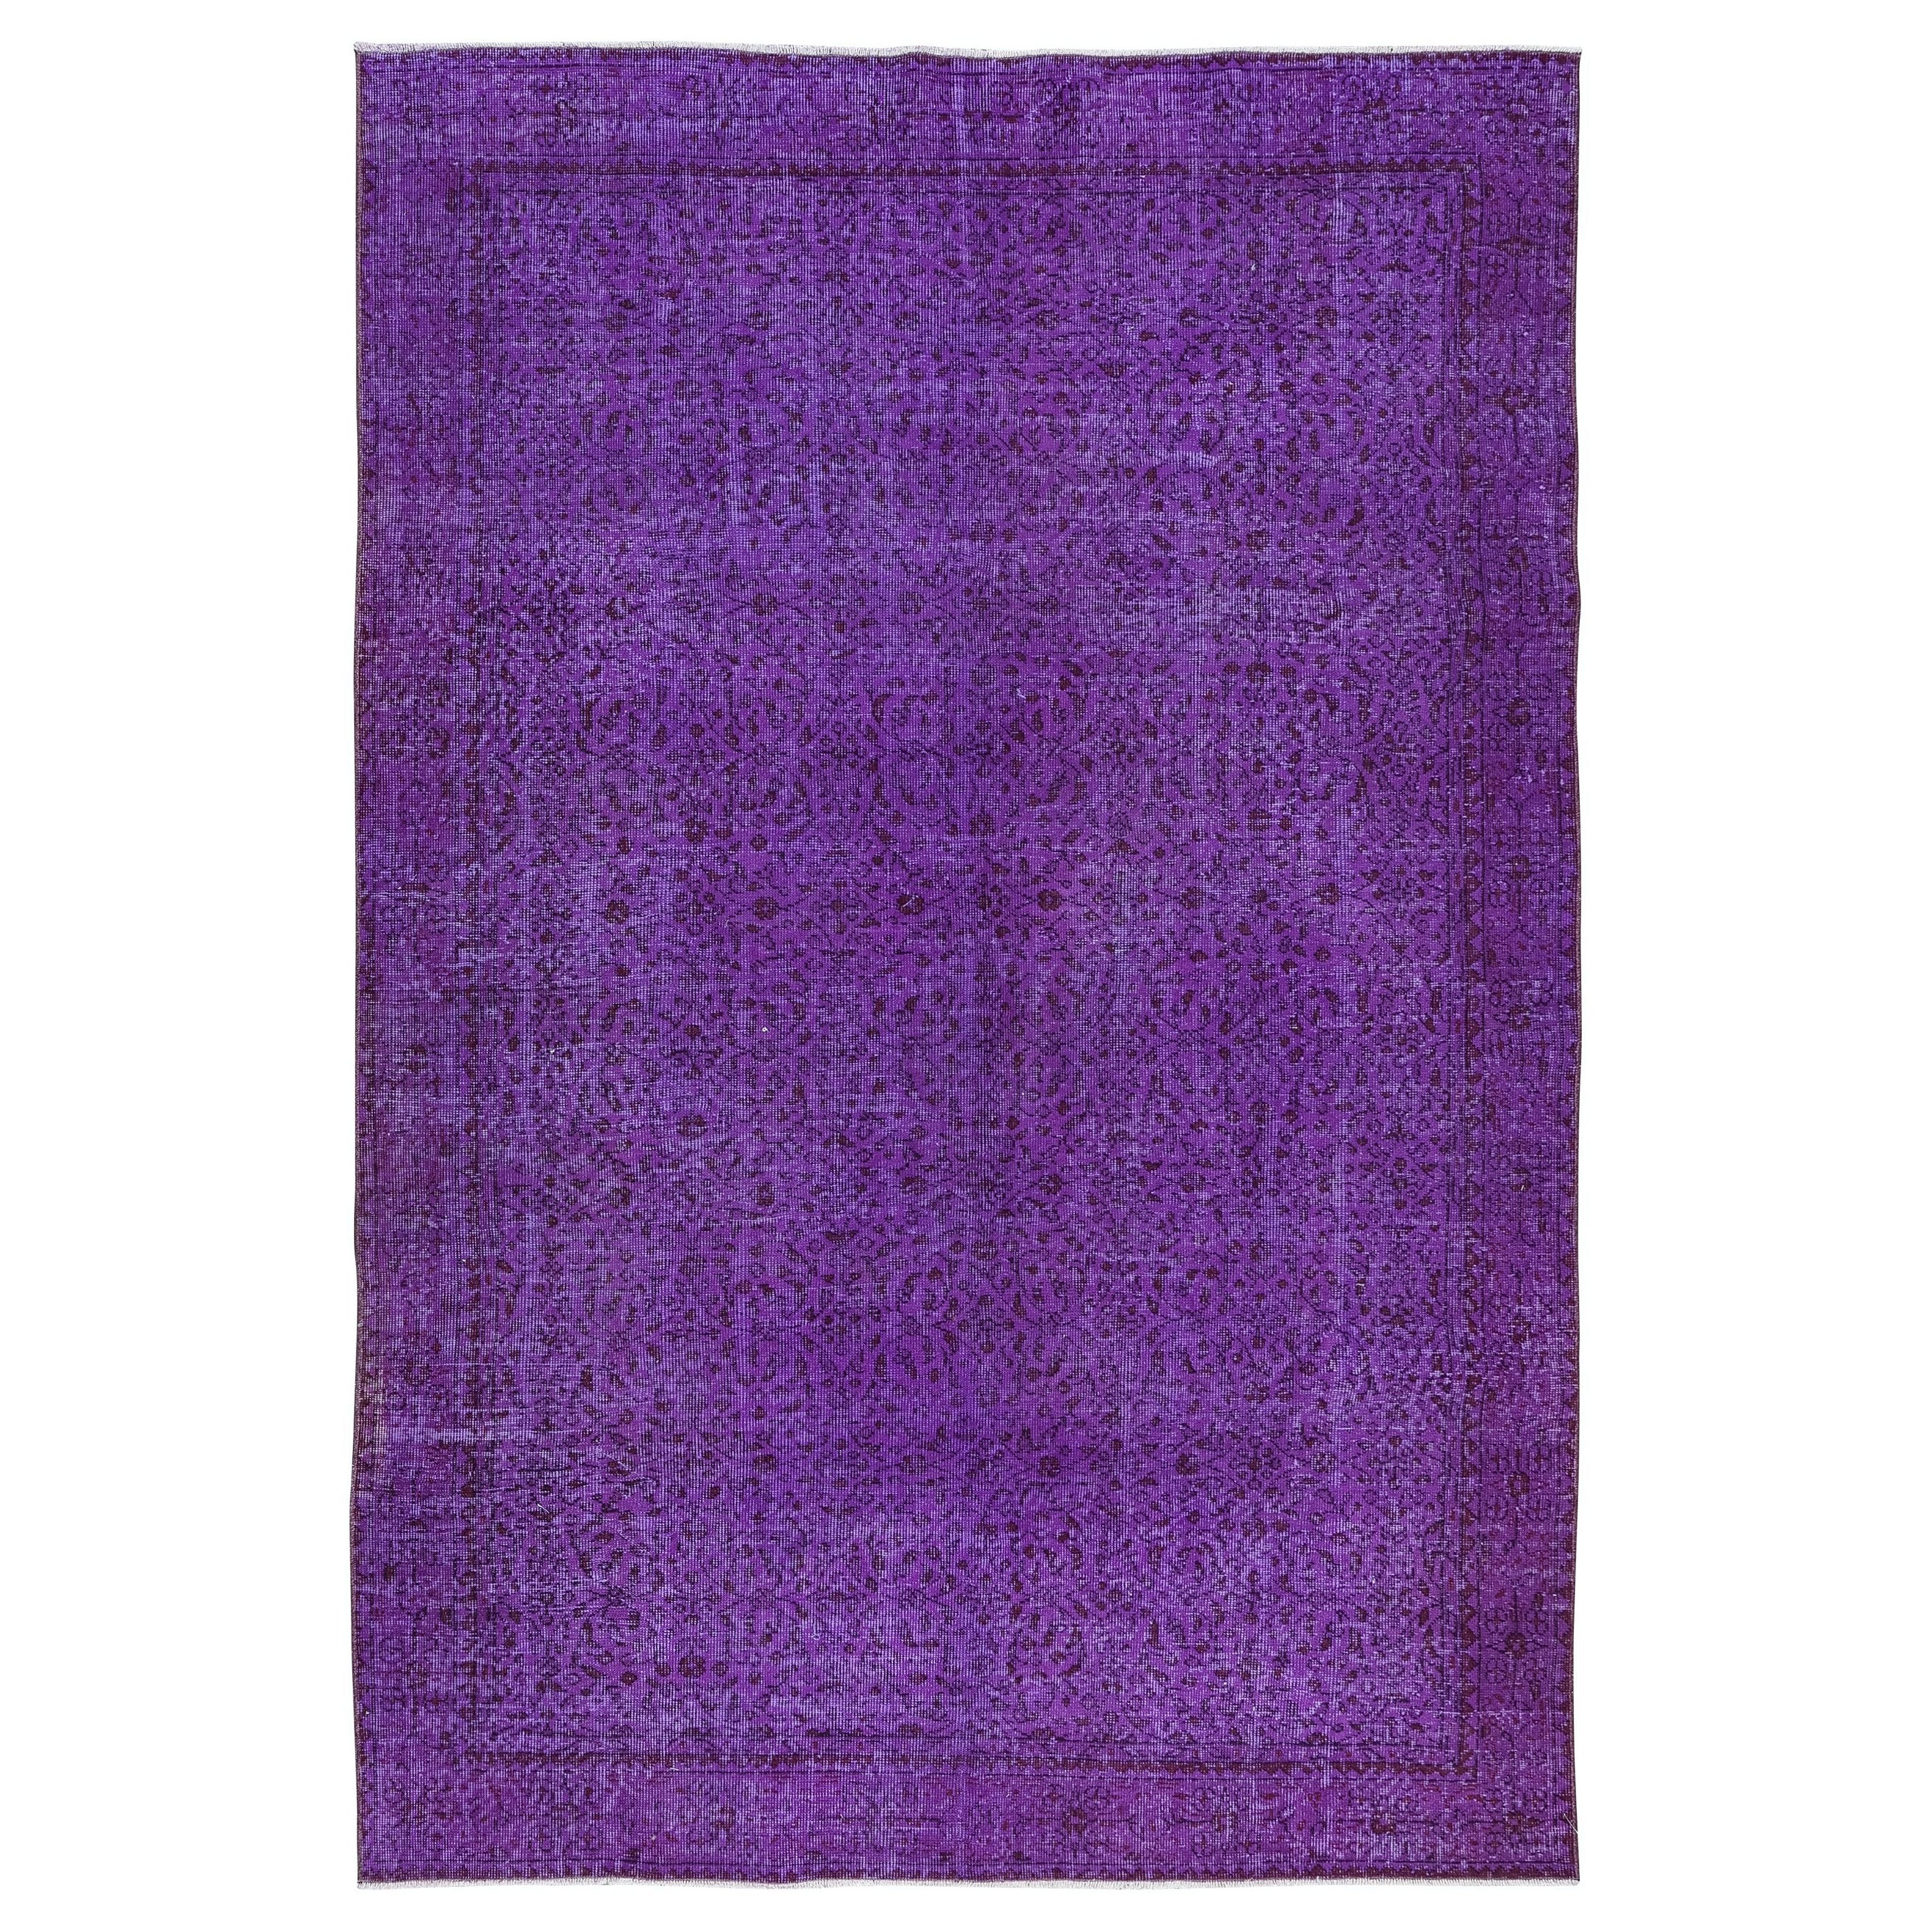 6.5x9.5 Ft Modern Floral Patterned Area Rug in Purple, Hand-Knotted in Turkey For Sale